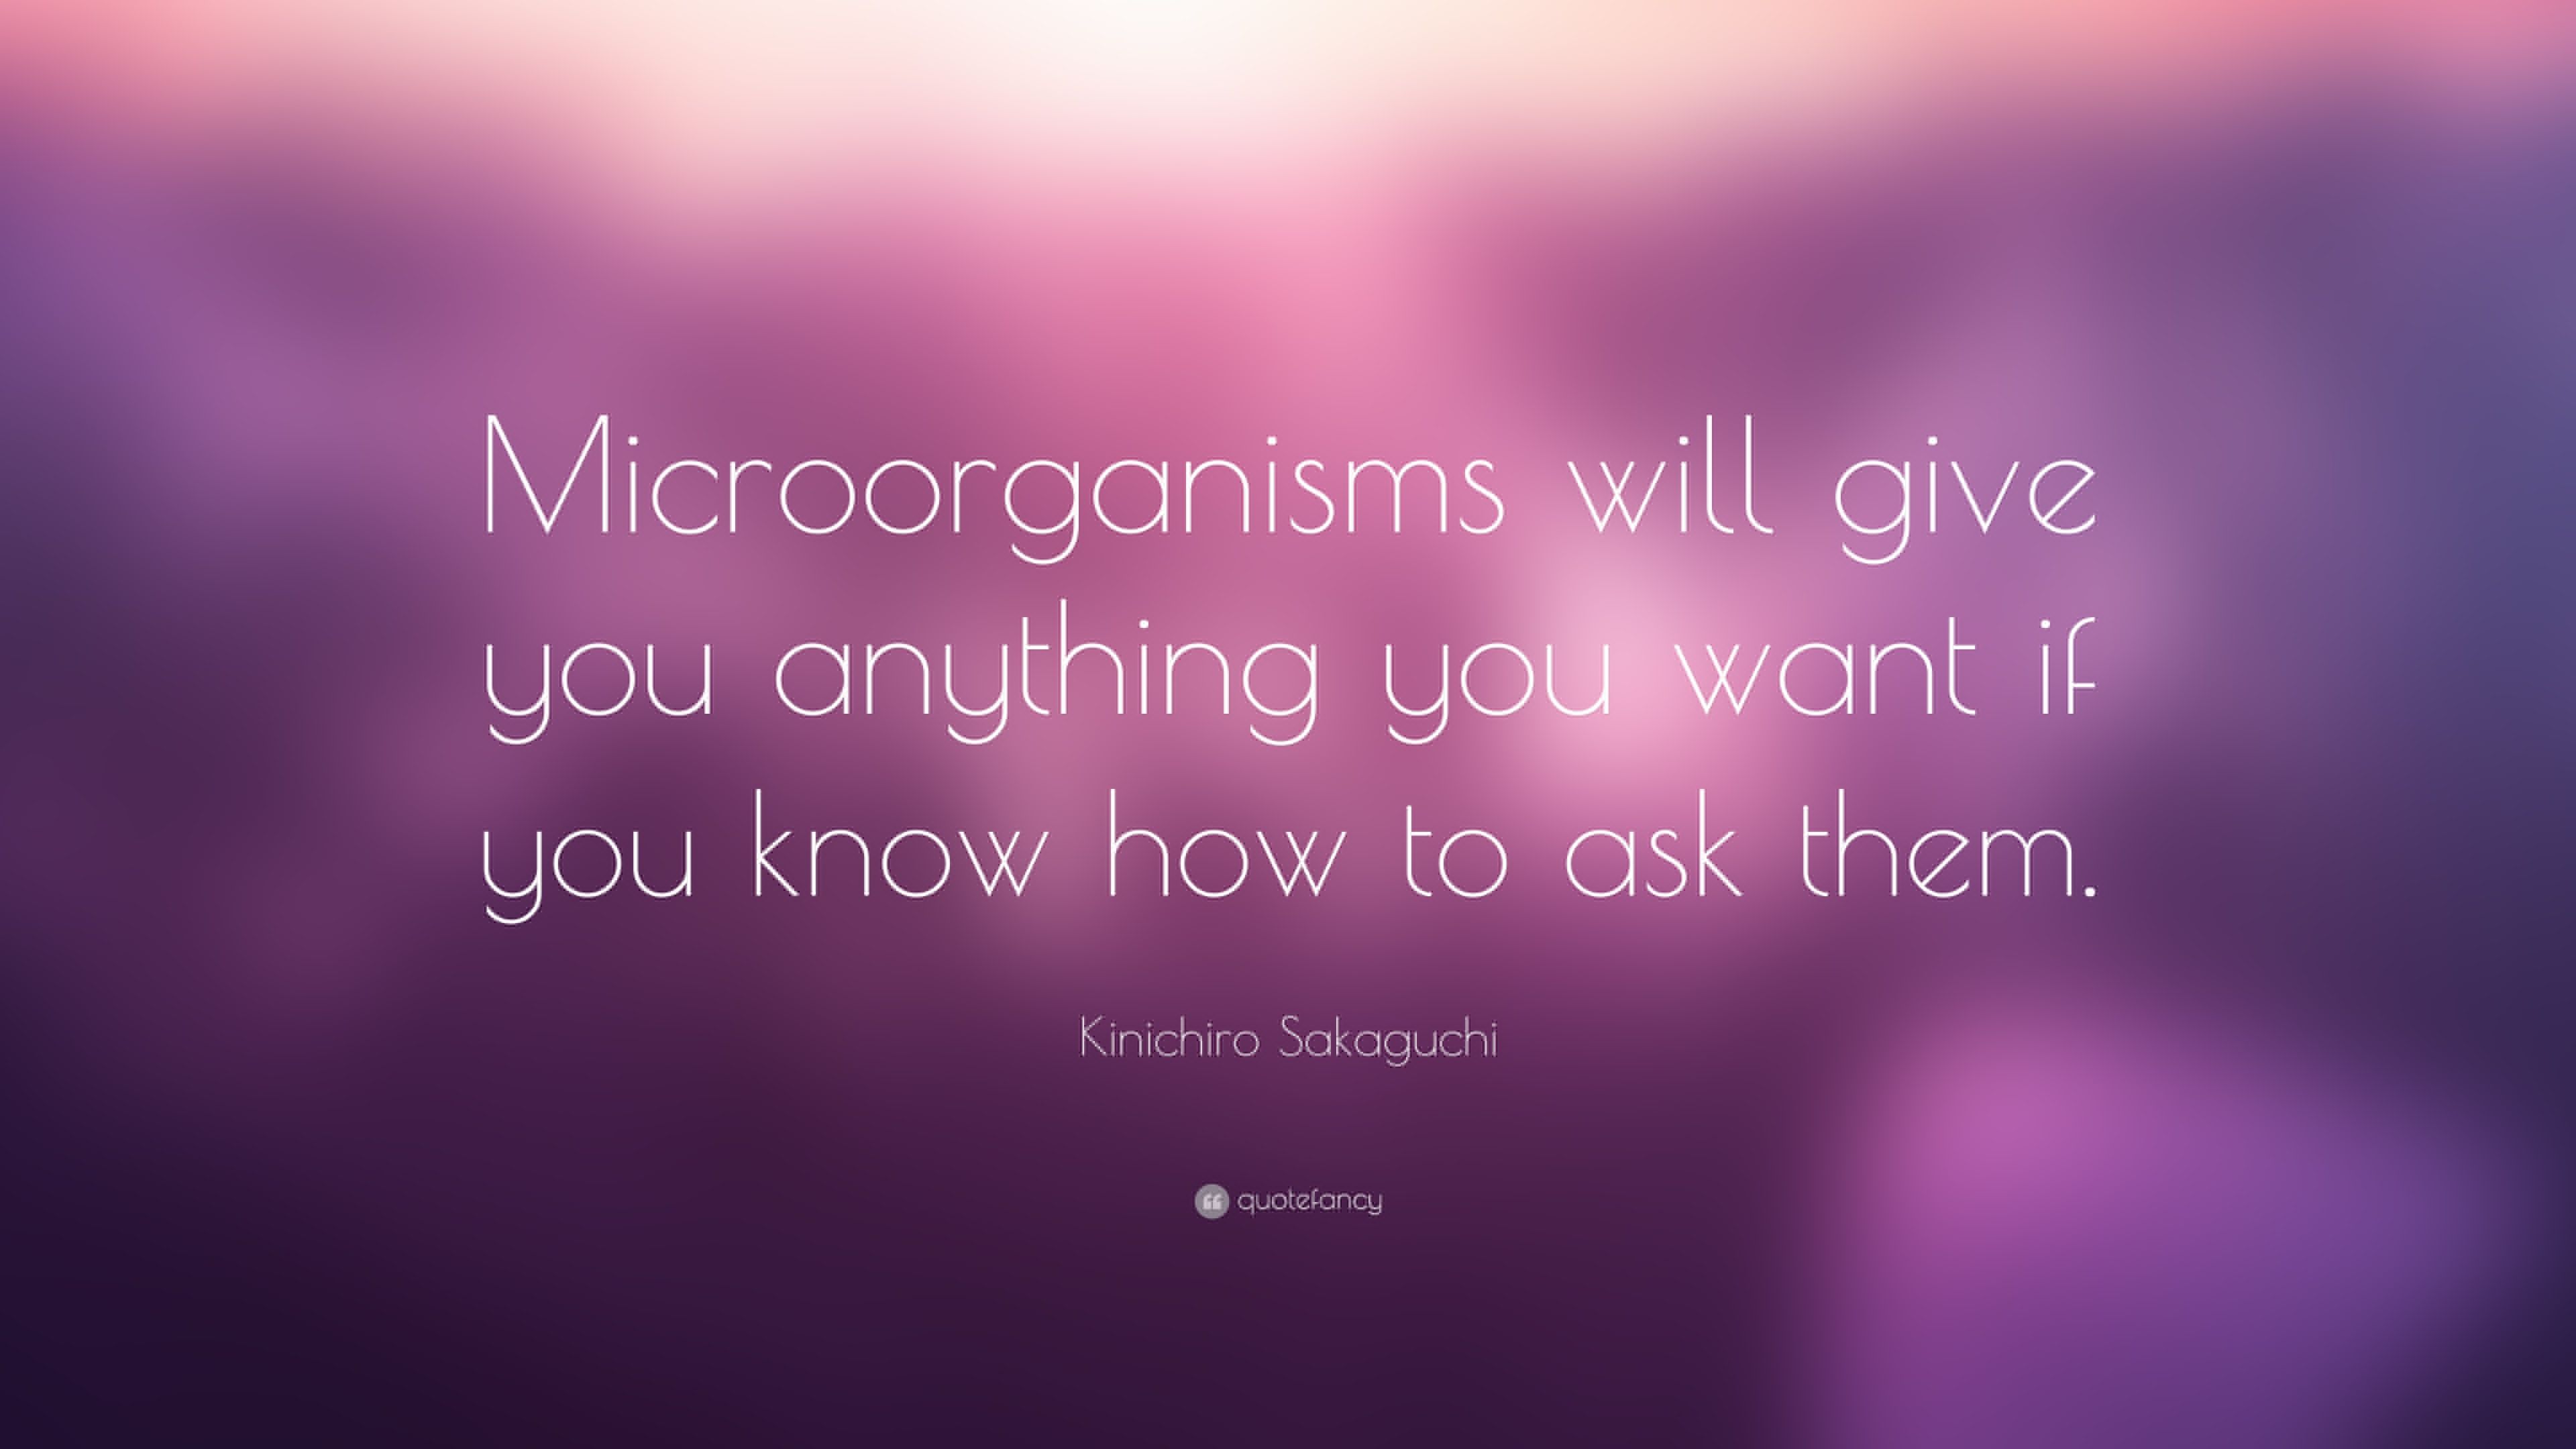 Kinichiro Sakaguchi Quote: “Microorganisms will give you anything you want if you know how to ask them.” (7 wallpaper)